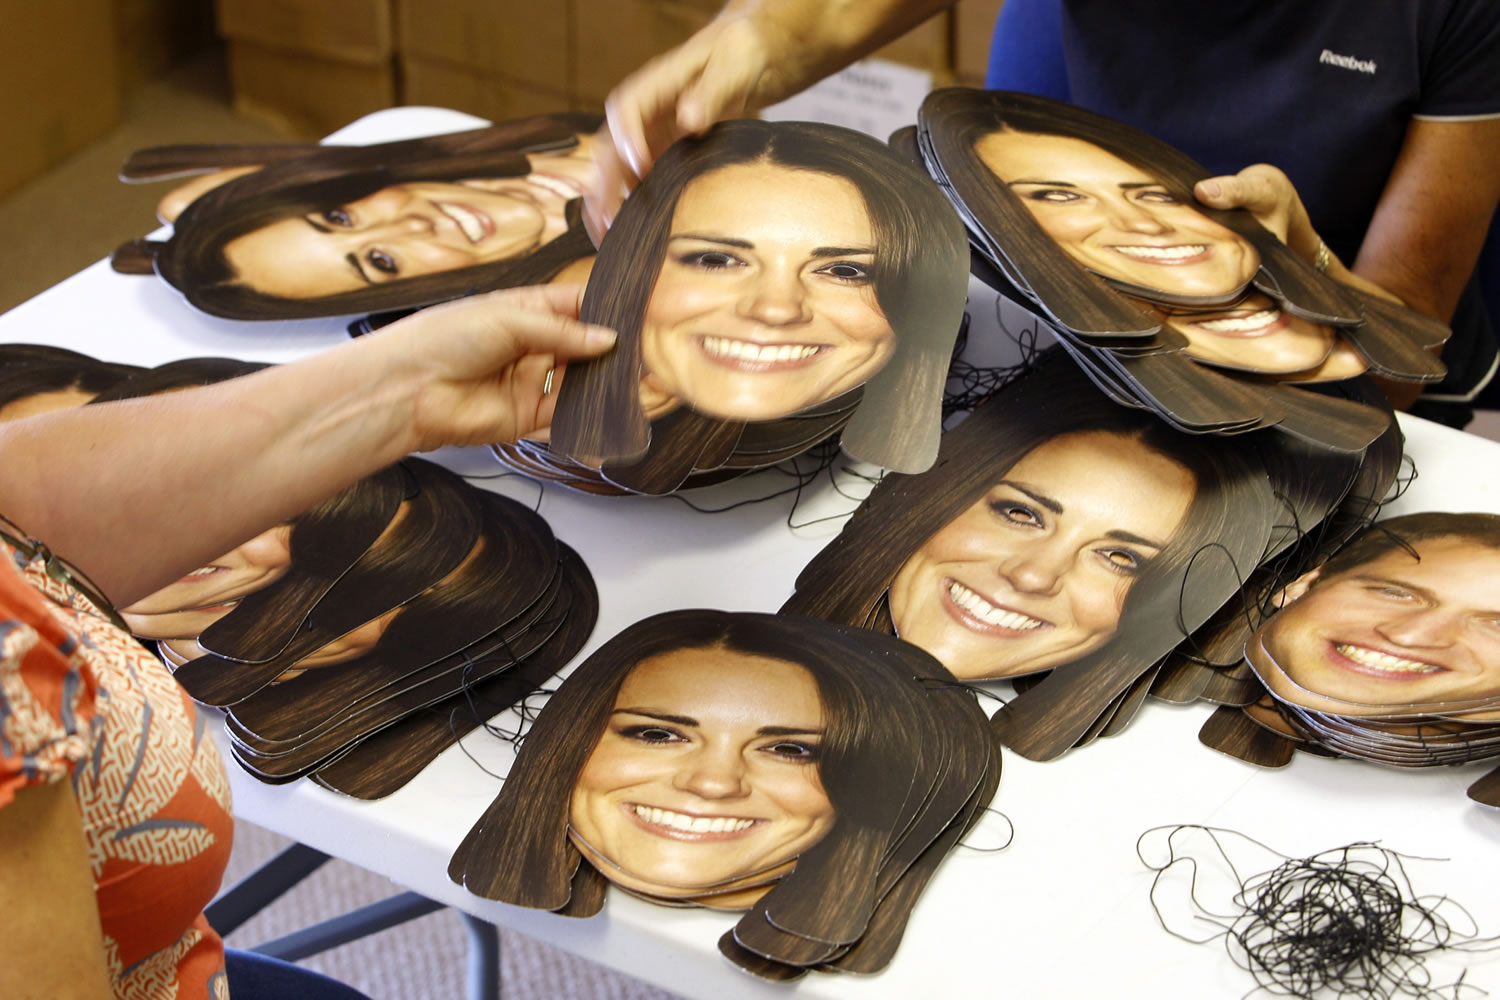 Workers from the Mask-arade mask company sort Kate, Duchess of Cambridge masks ready for dispatch June 6 at the company works in Southam, England. Mask-arade are in overdrive printing masks of Kate and William for the street parties that will follow the announcement of the birth of the Royal baby, expected in July.